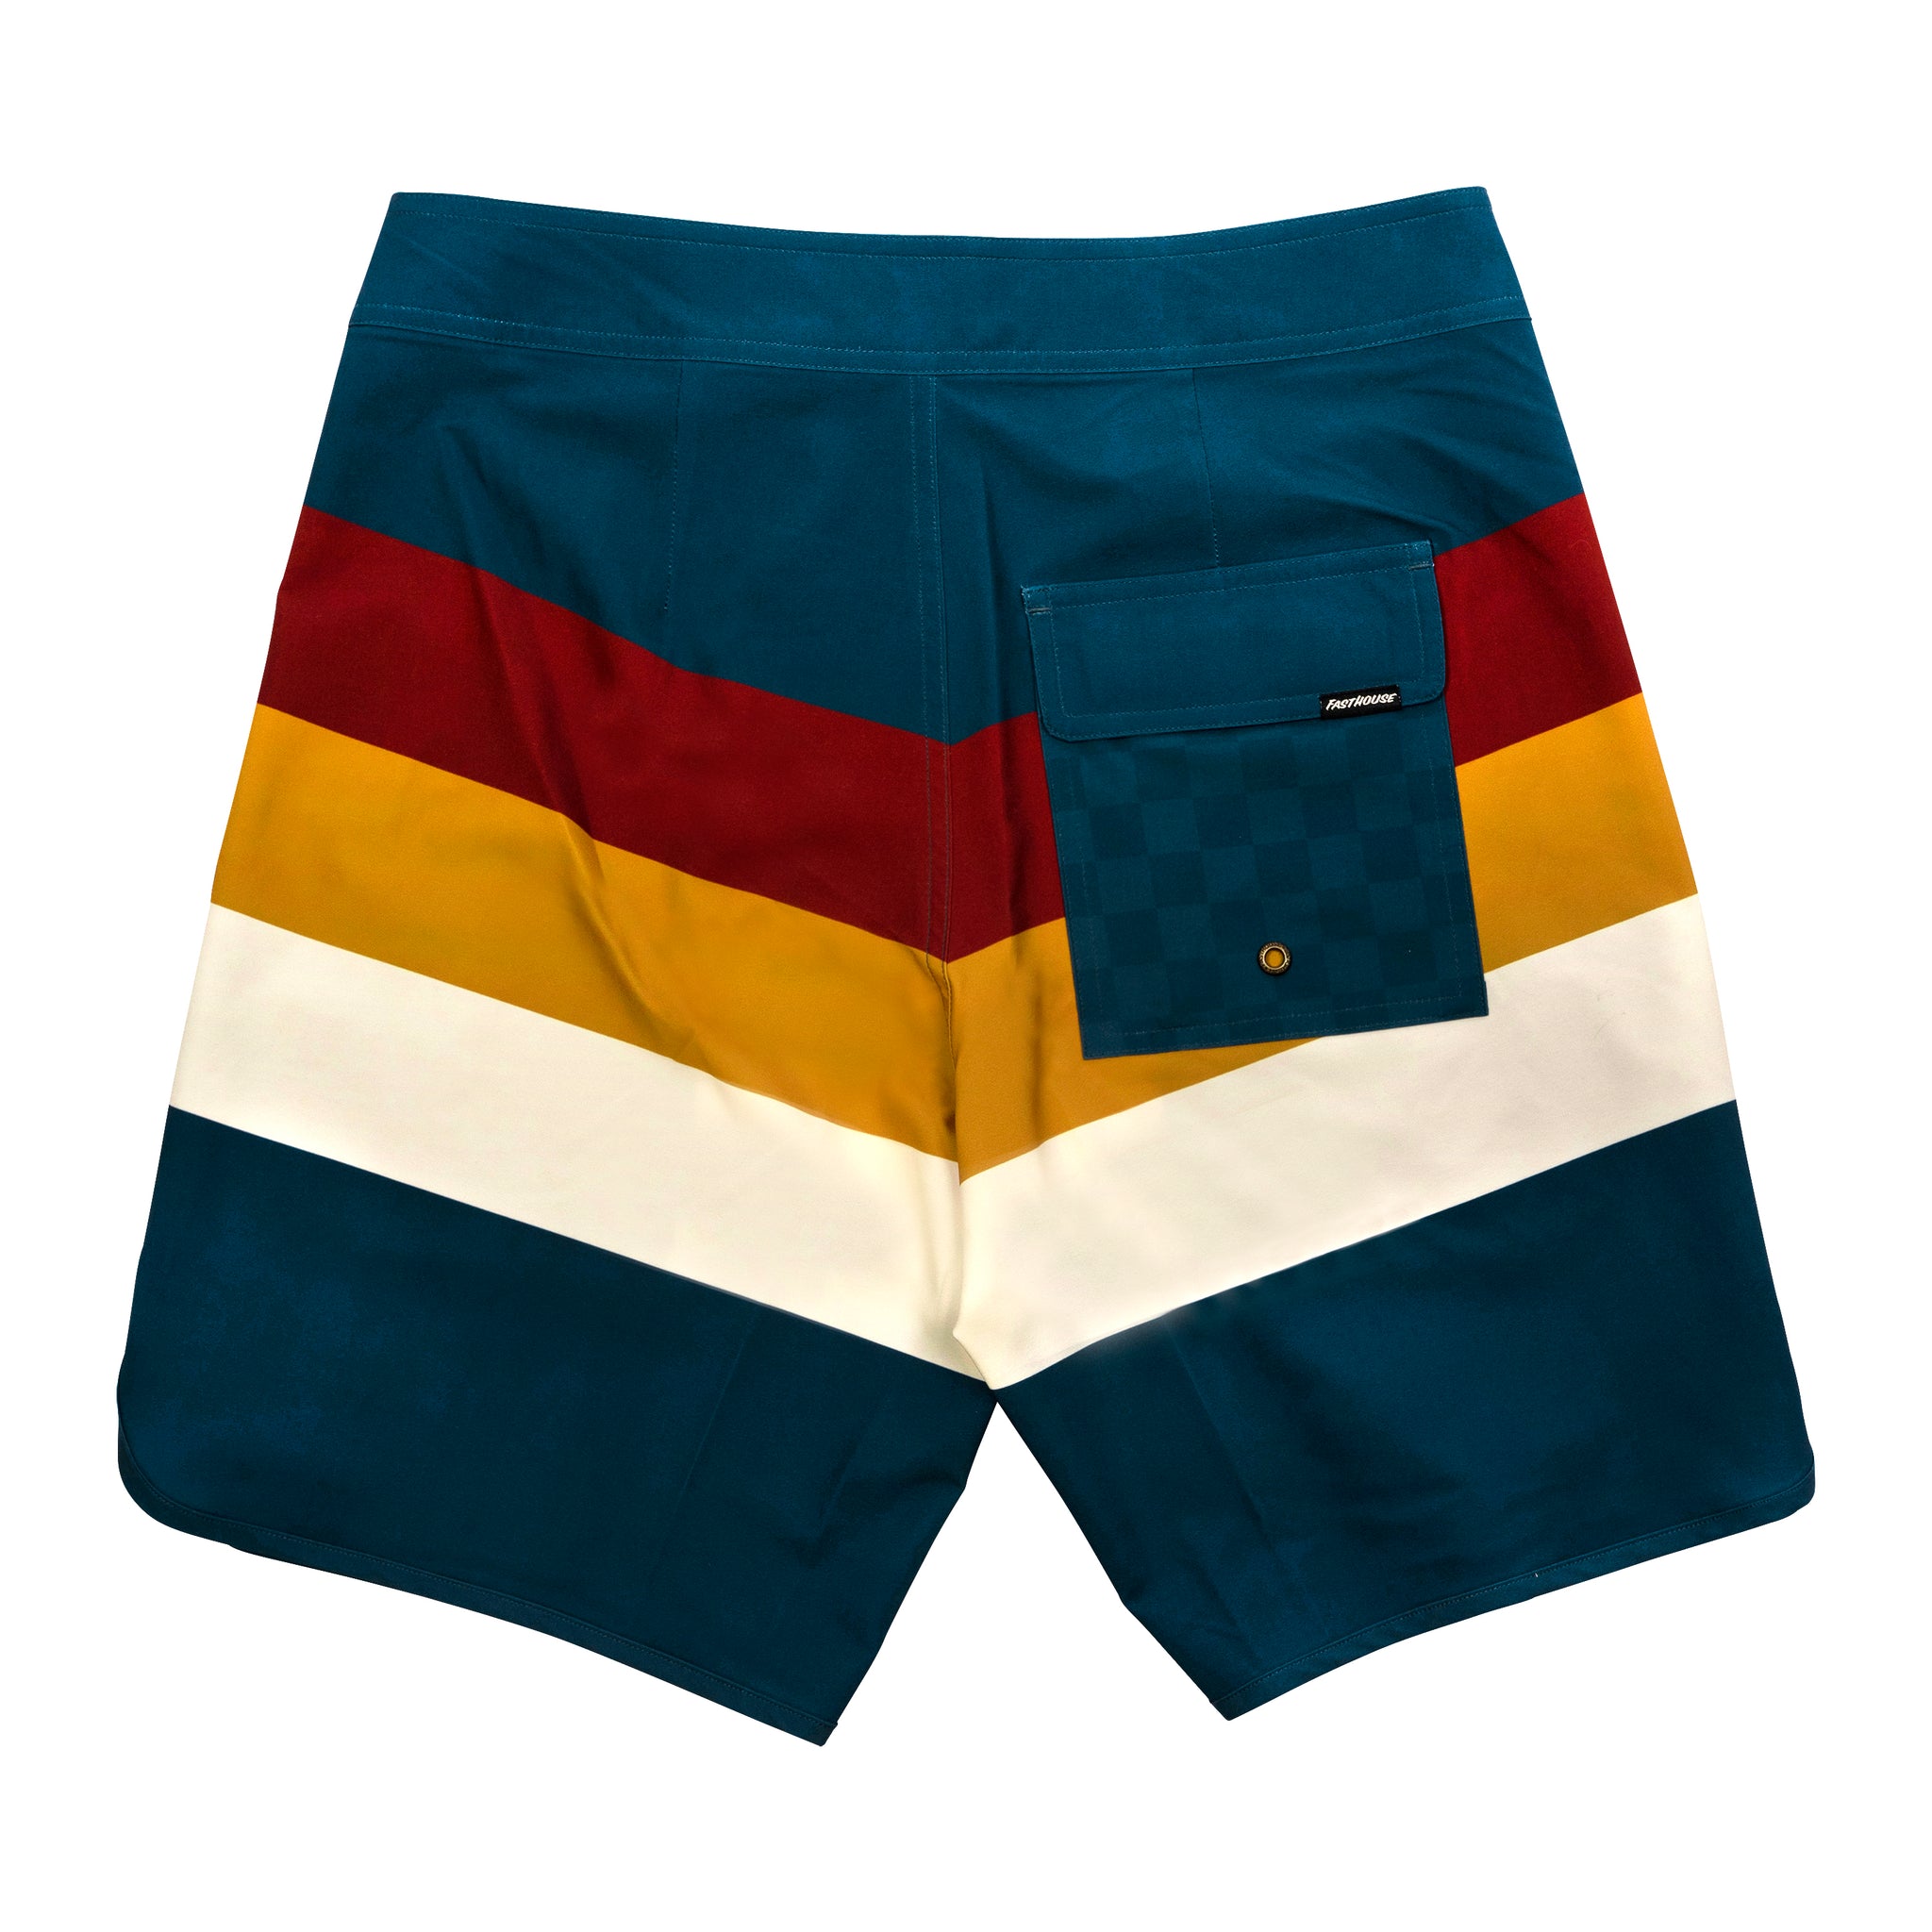 After Hours 18" Shorts